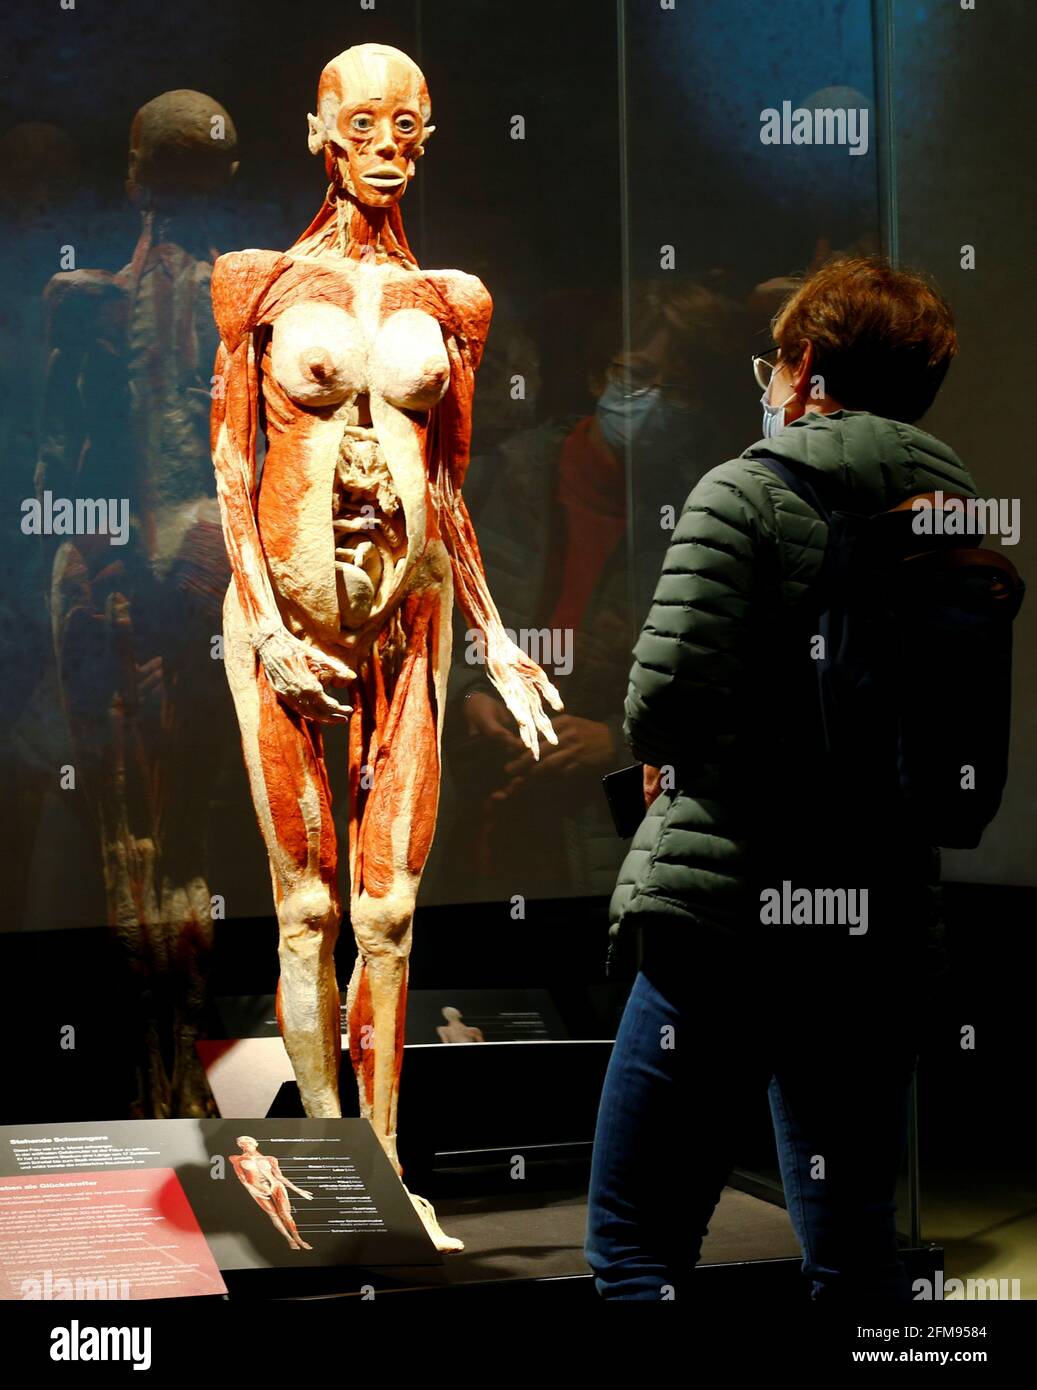 A woman looks at a plastinated body of a pregnant woman during the  exhibition "Body Worlds" by Gunther von Hagen at the Museo Miraflores in  Guatemala City July 6, 2012. This is